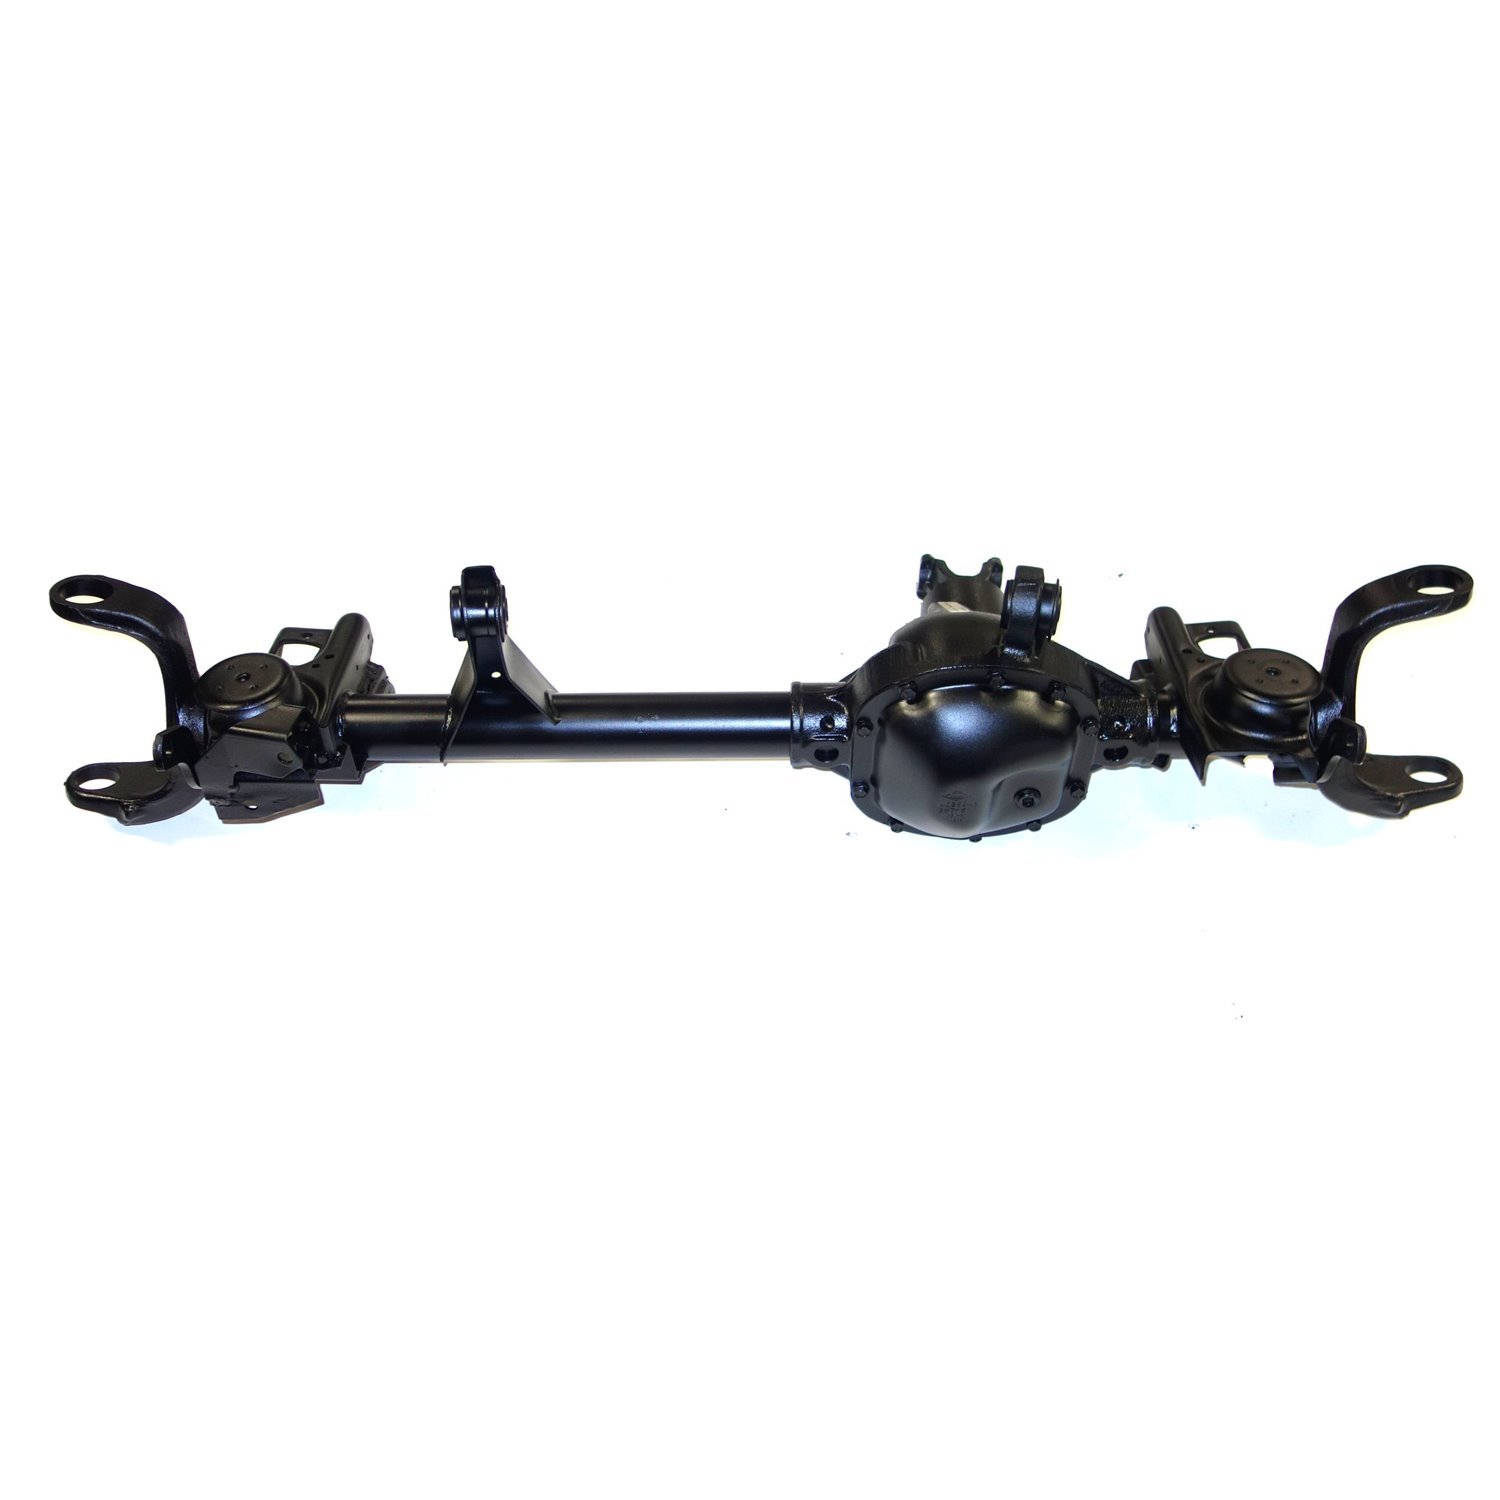 Remanufactured Complete Axle Assembly for Dana 30 97-05 Jeep Wrangler 3.73 Ratio w/o ABS